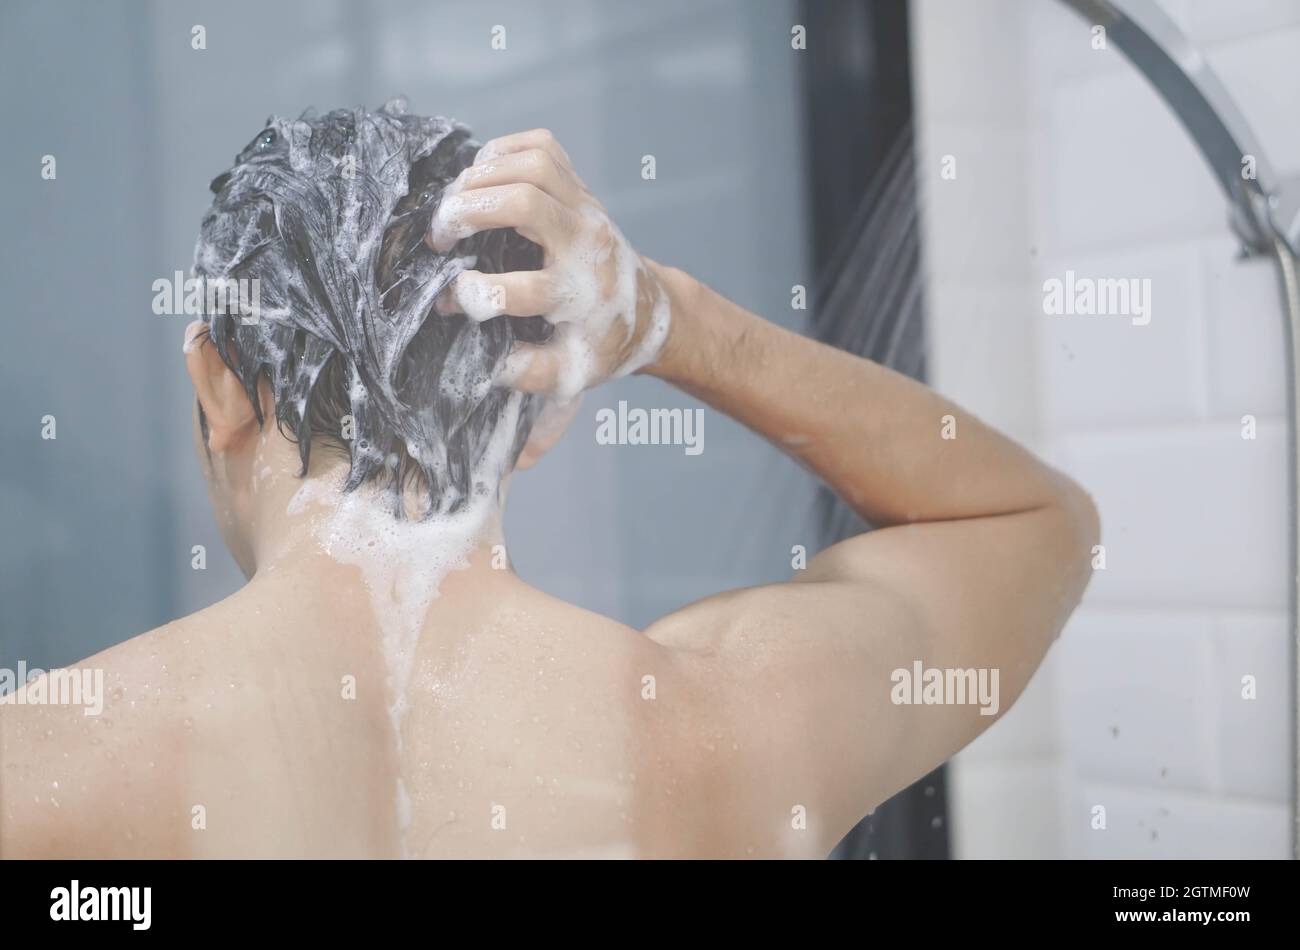 Rear View Of Shirtless Man Bathing In Bathroom At Home Stock Photo